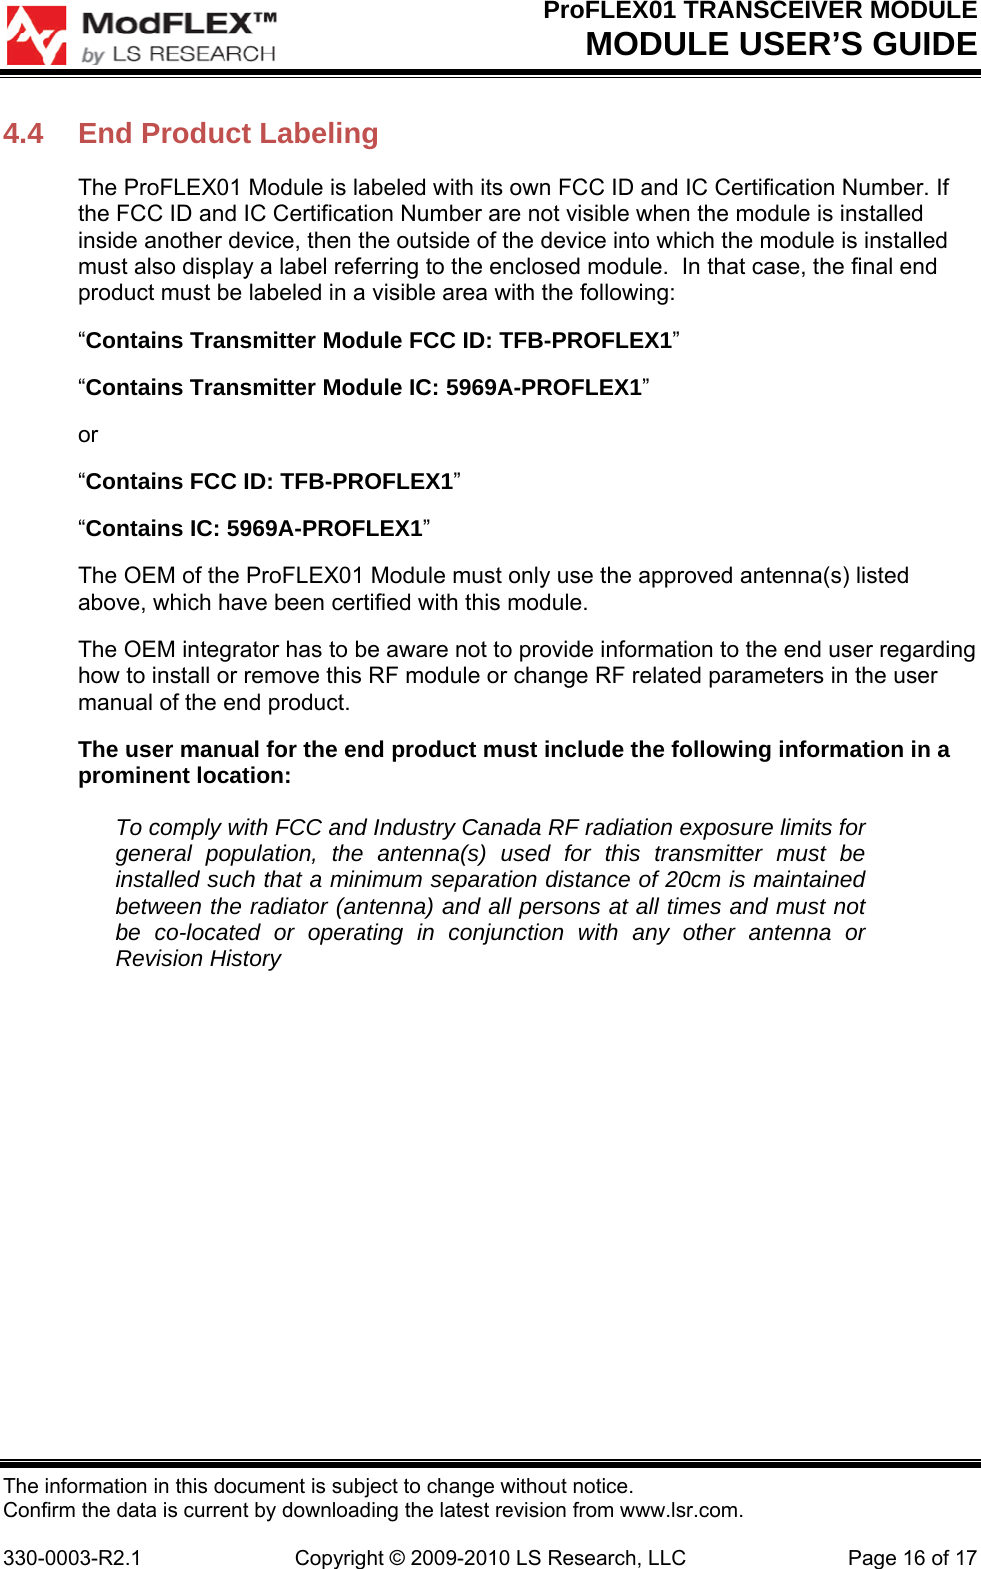 ProFLEX01 TRANSCEIVER MODULE MODULE USER’S GUIDE The information in this document is subject to change without notice. Confirm the data is current by downloading the latest revision from www.lsr.com.  330-0003-R2.1  Copyright © 2009-2010 LS Research, LLC  Page 16 of 17 4.4  End Product Labeling The ProFLEX01 Module is labeled with its own FCC ID and IC Certification Number. If the FCC ID and IC Certification Number are not visible when the module is installed inside another device, then the outside of the device into which the module is installed must also display a label referring to the enclosed module.  In that case, the final end product must be labeled in a visible area with the following: “Contains Transmitter Module FCC ID: TFB-PROFLEX1” “Contains Transmitter Module IC: 5969A-PROFLEX1” or “Contains FCC ID: TFB-PROFLEX1” “Contains IC: 5969A-PROFLEX1” The OEM of the ProFLEX01 Module must only use the approved antenna(s) listed above, which have been certified with this module. The OEM integrator has to be aware not to provide information to the end user regarding how to install or remove this RF module or change RF related parameters in the user manual of the end product. The user manual for the end product must include the following information in a prominent location: To comply with FCC and Industry Canada RF radiation exposure limits for general population, the antenna(s) used for this transmitter must be installed such that a minimum separation distance of 20cm is maintained between the radiator (antenna) and all persons at all times and must not be co-located or operating in conjunction with any other antenna or Revision History 